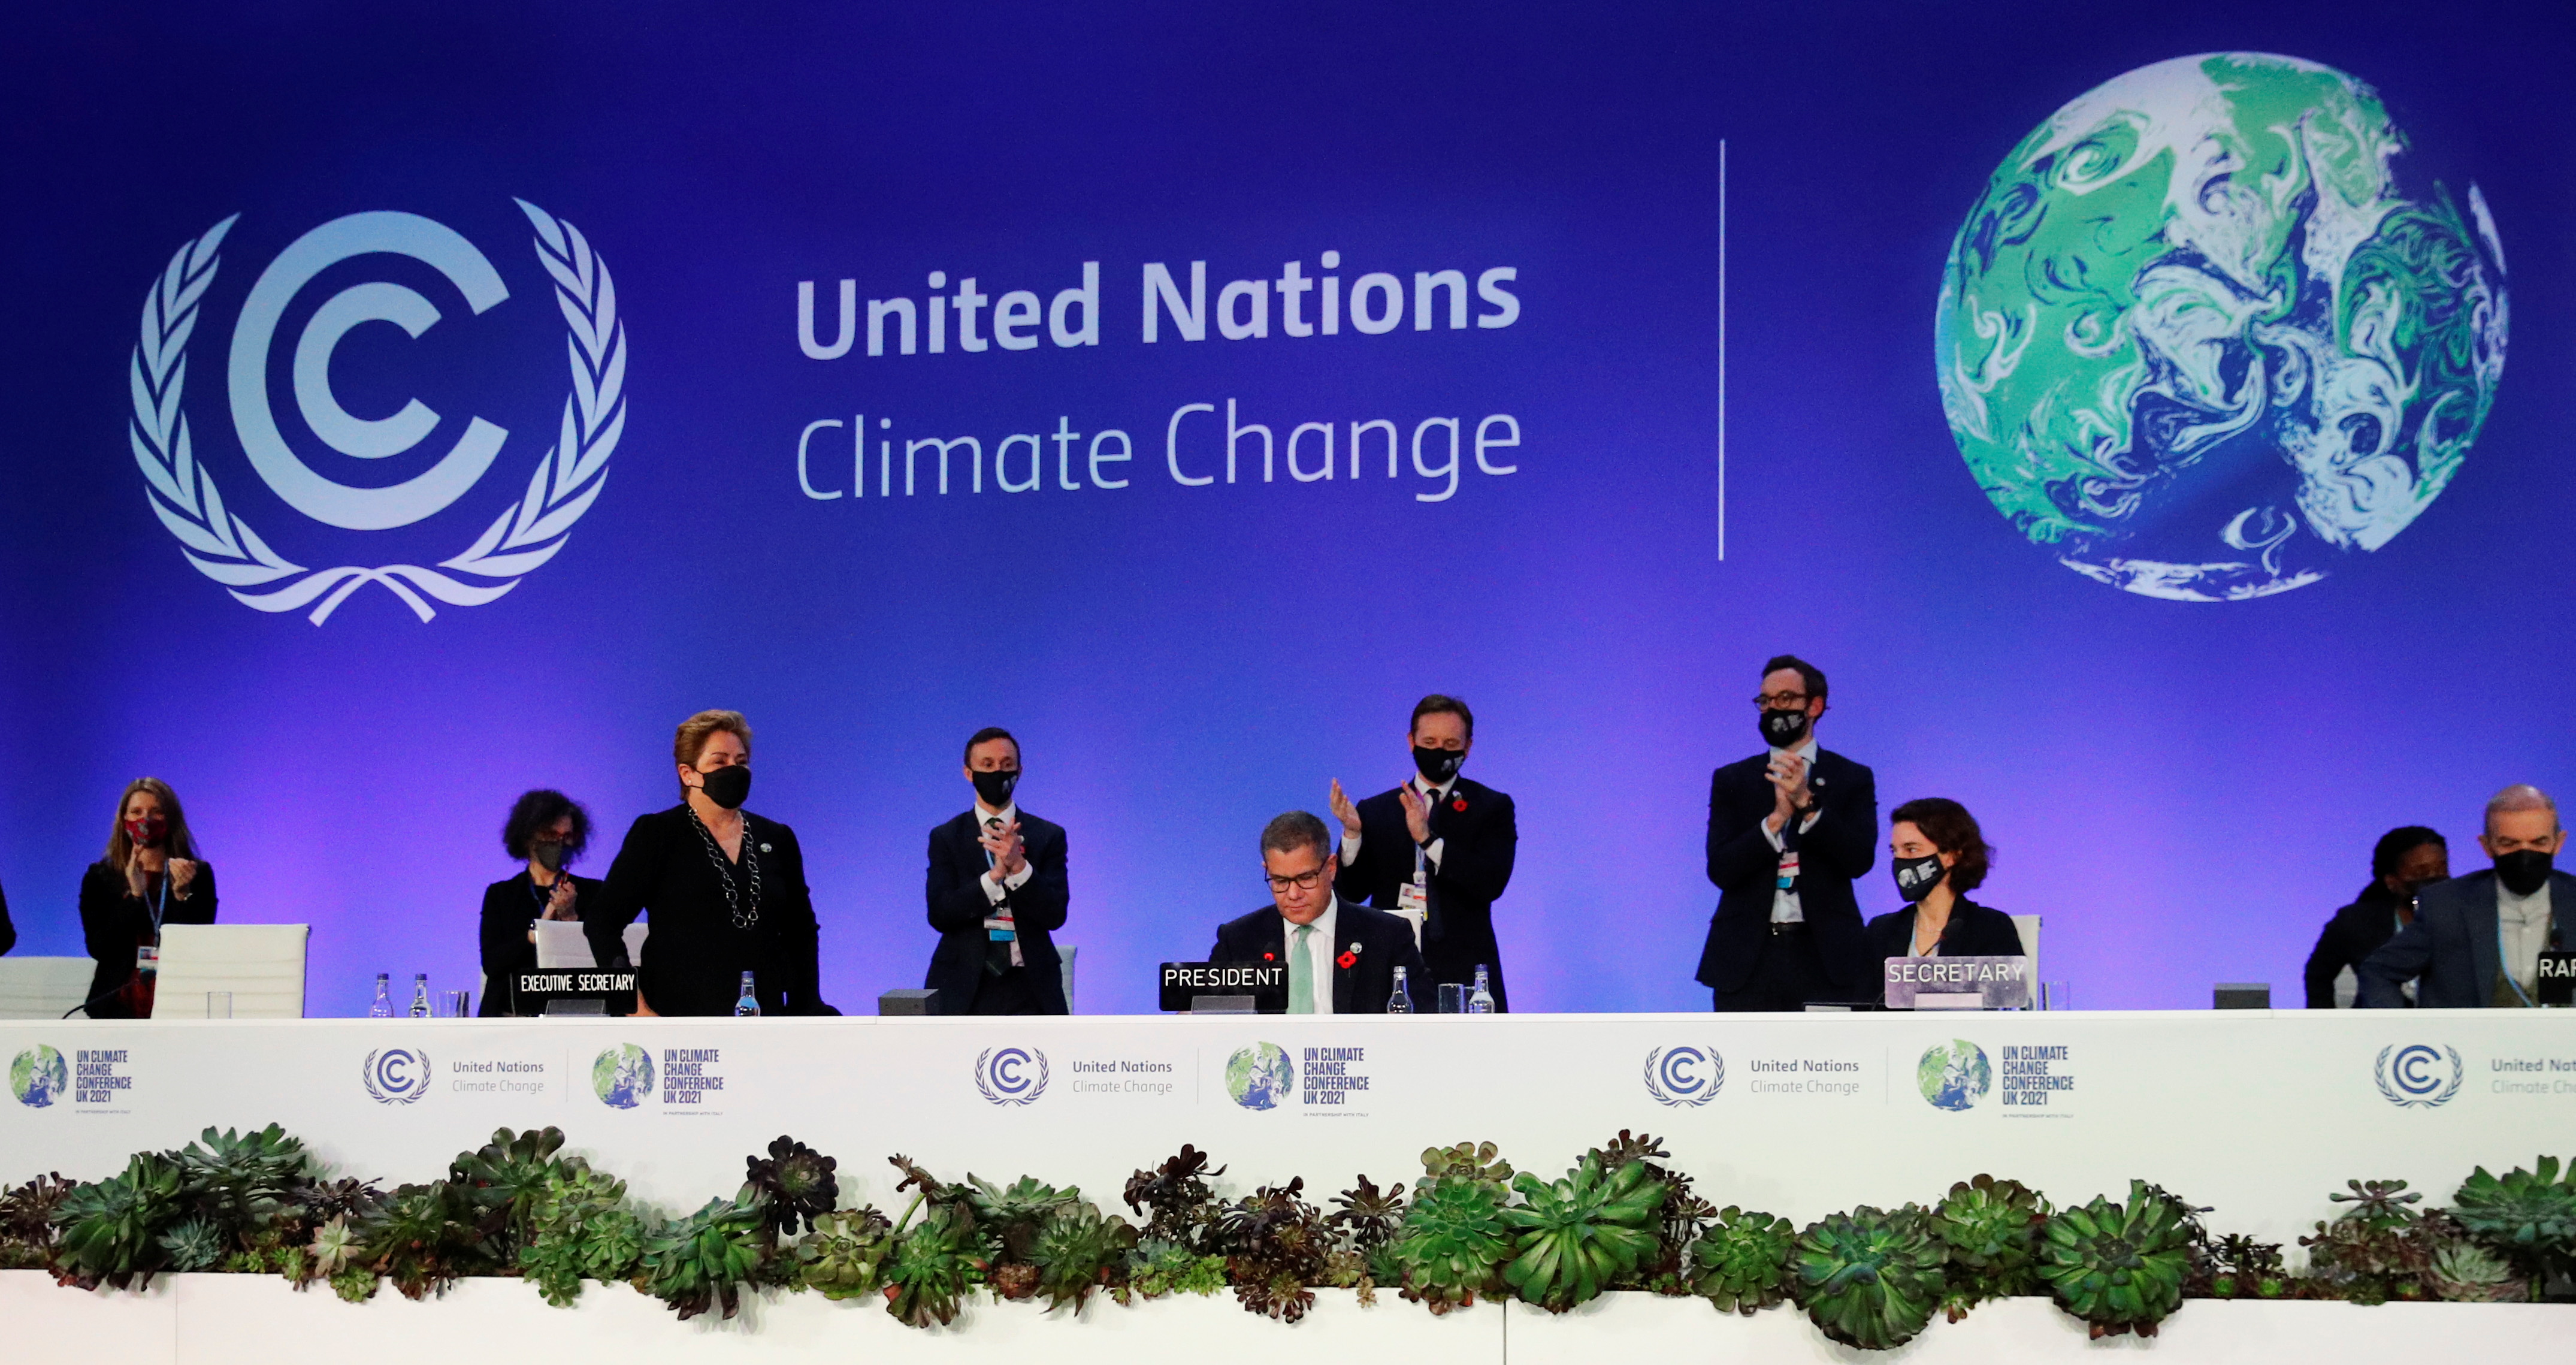 V. Challenges and Criticisms Surrounding Climate Change Negotiations